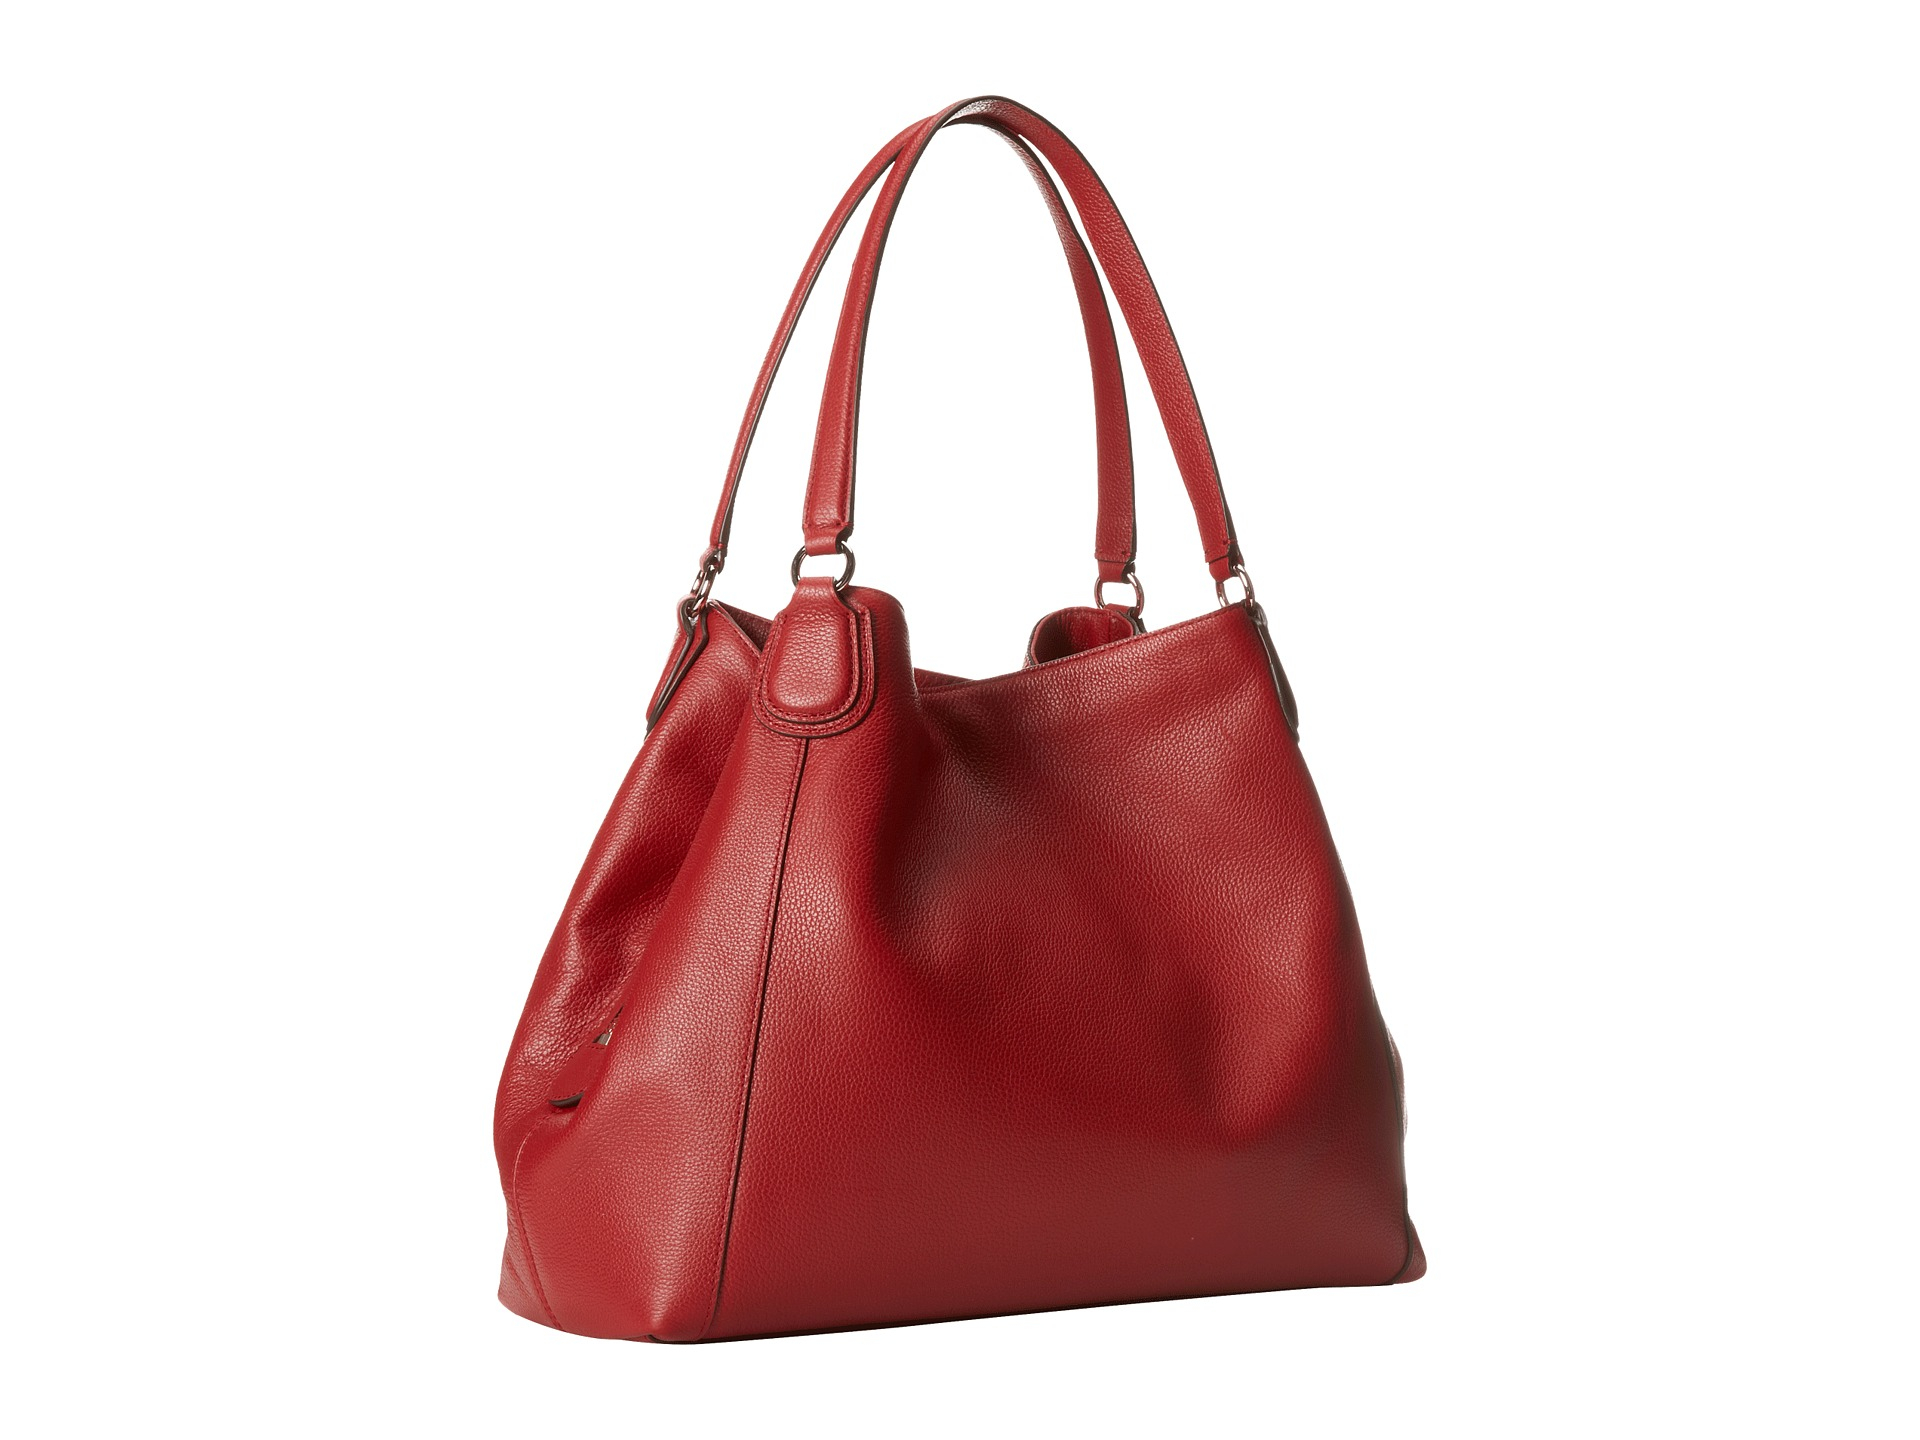 COACH Refined Pebbled Leather Edie Shoulder Bag in Red - Lyst